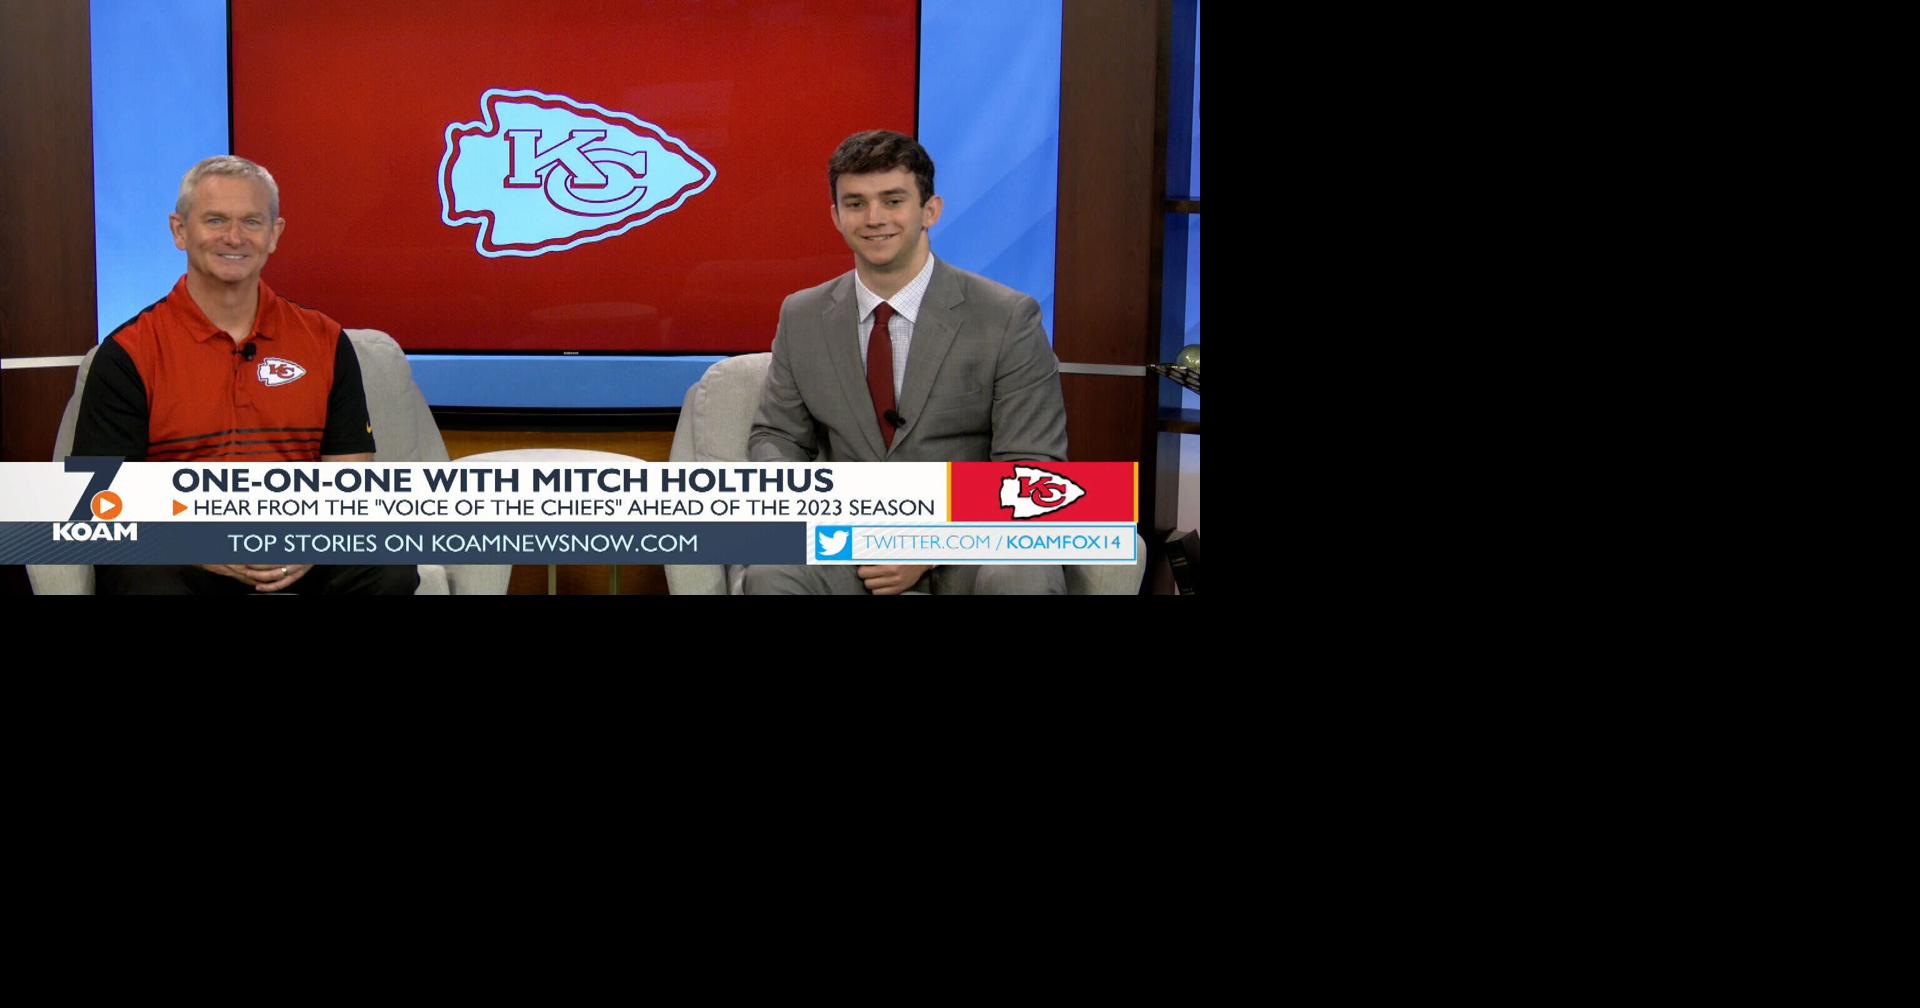 EXTENDED INTERVIEW: Mitch Holthus previews 2023 Chiefs season, News